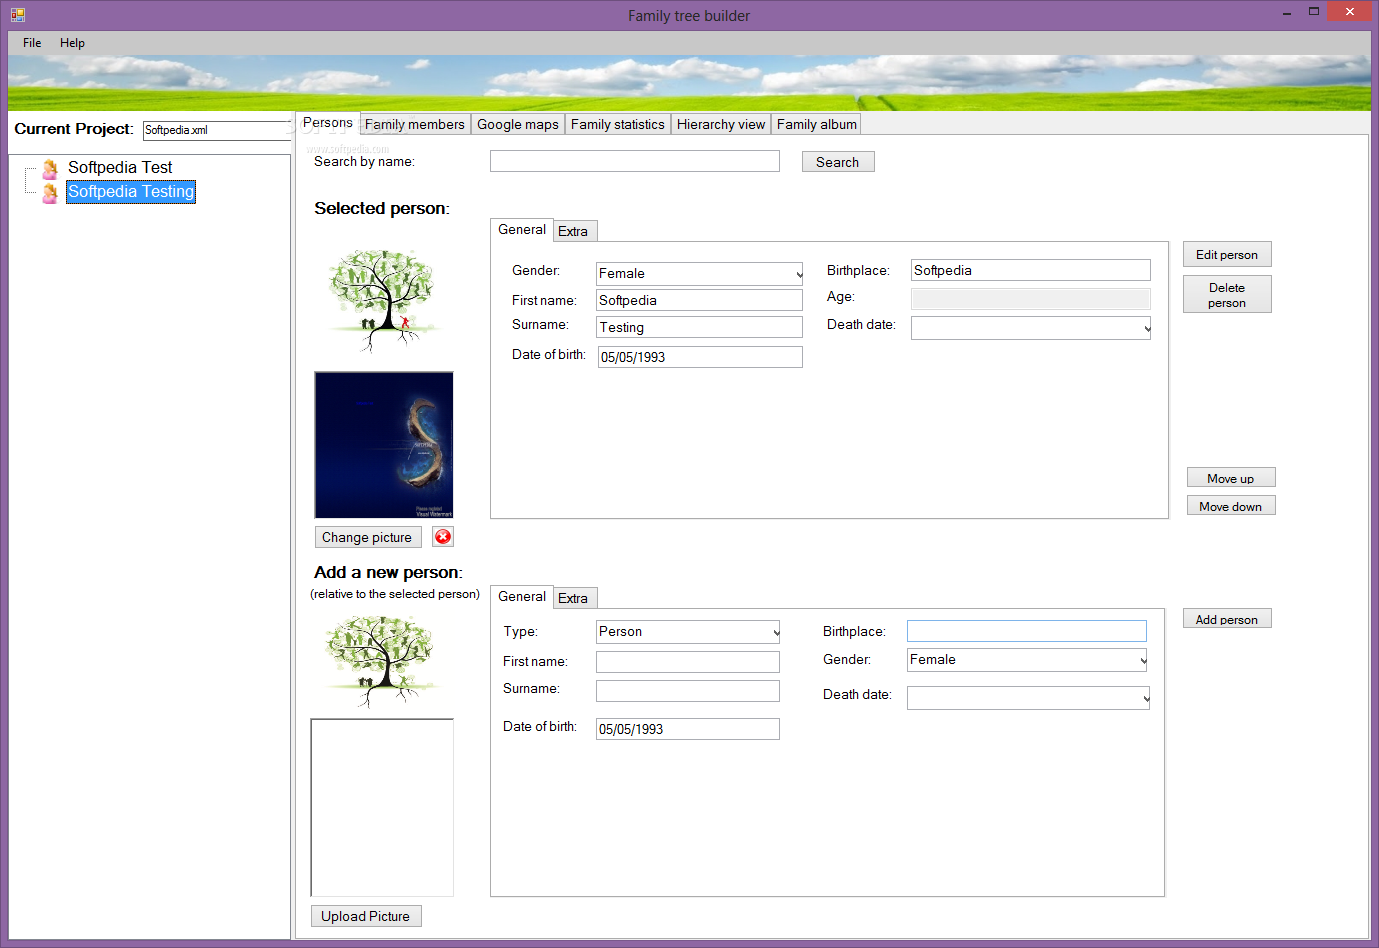  Download  Family  tree  builder  1 3